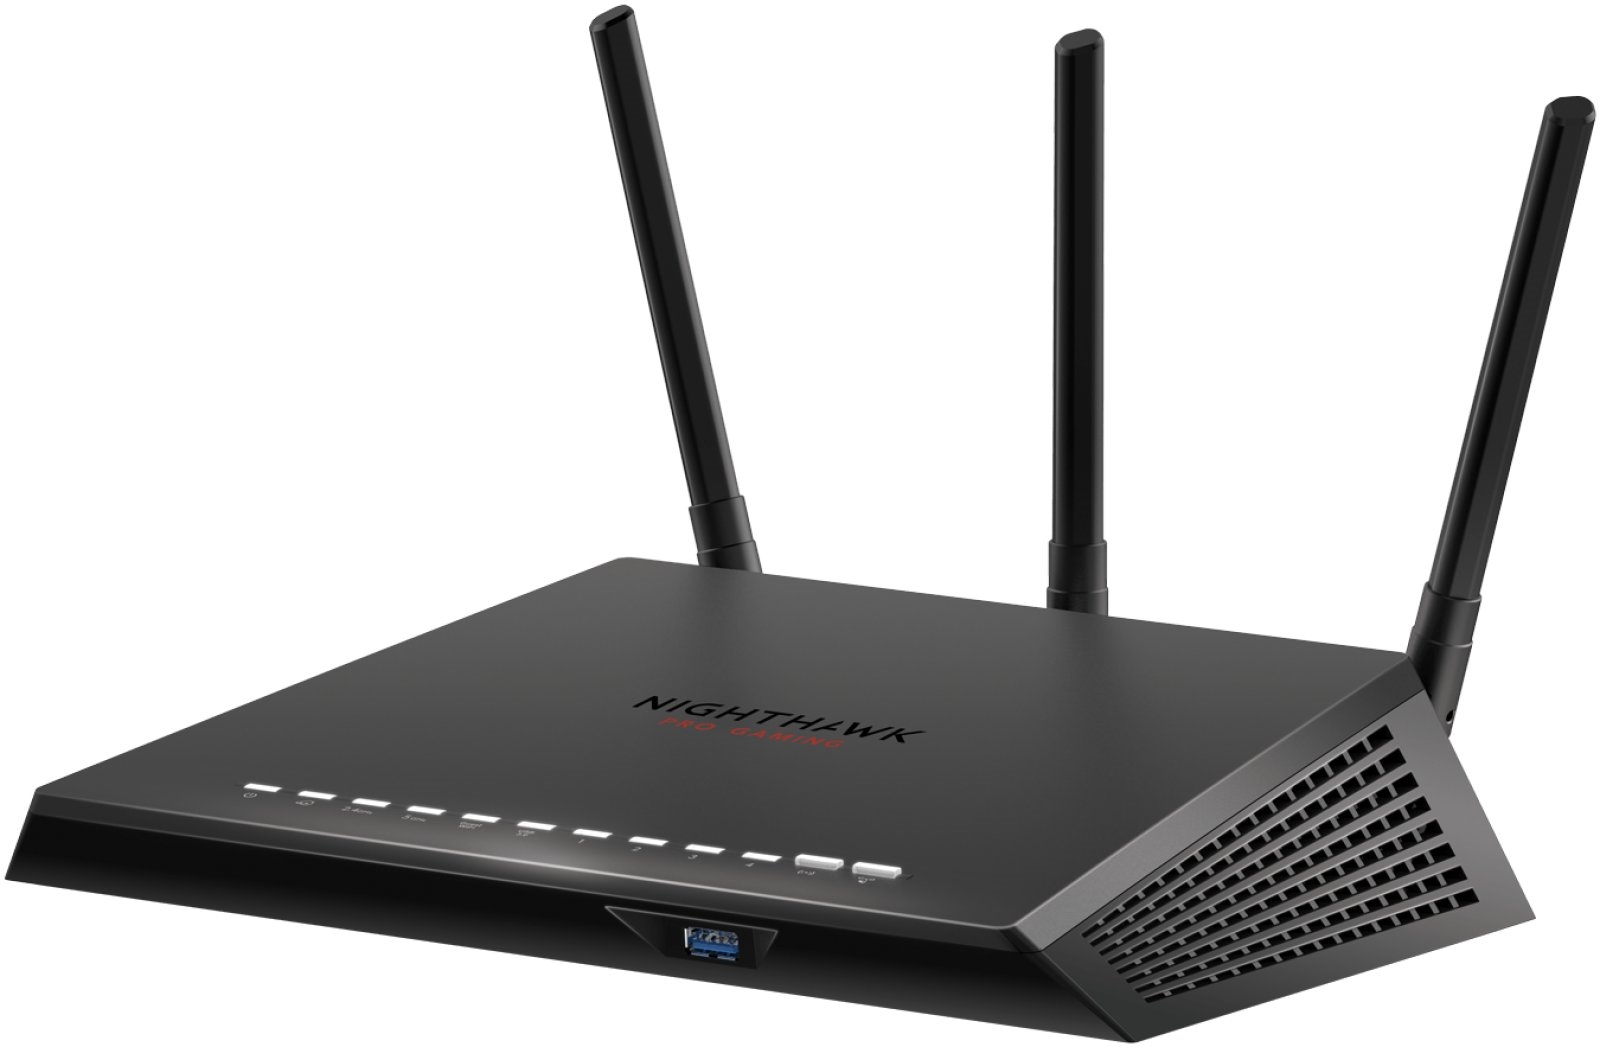 Netgear's latest gaming router goes on sale in April for $199 | DeviceDaily.com